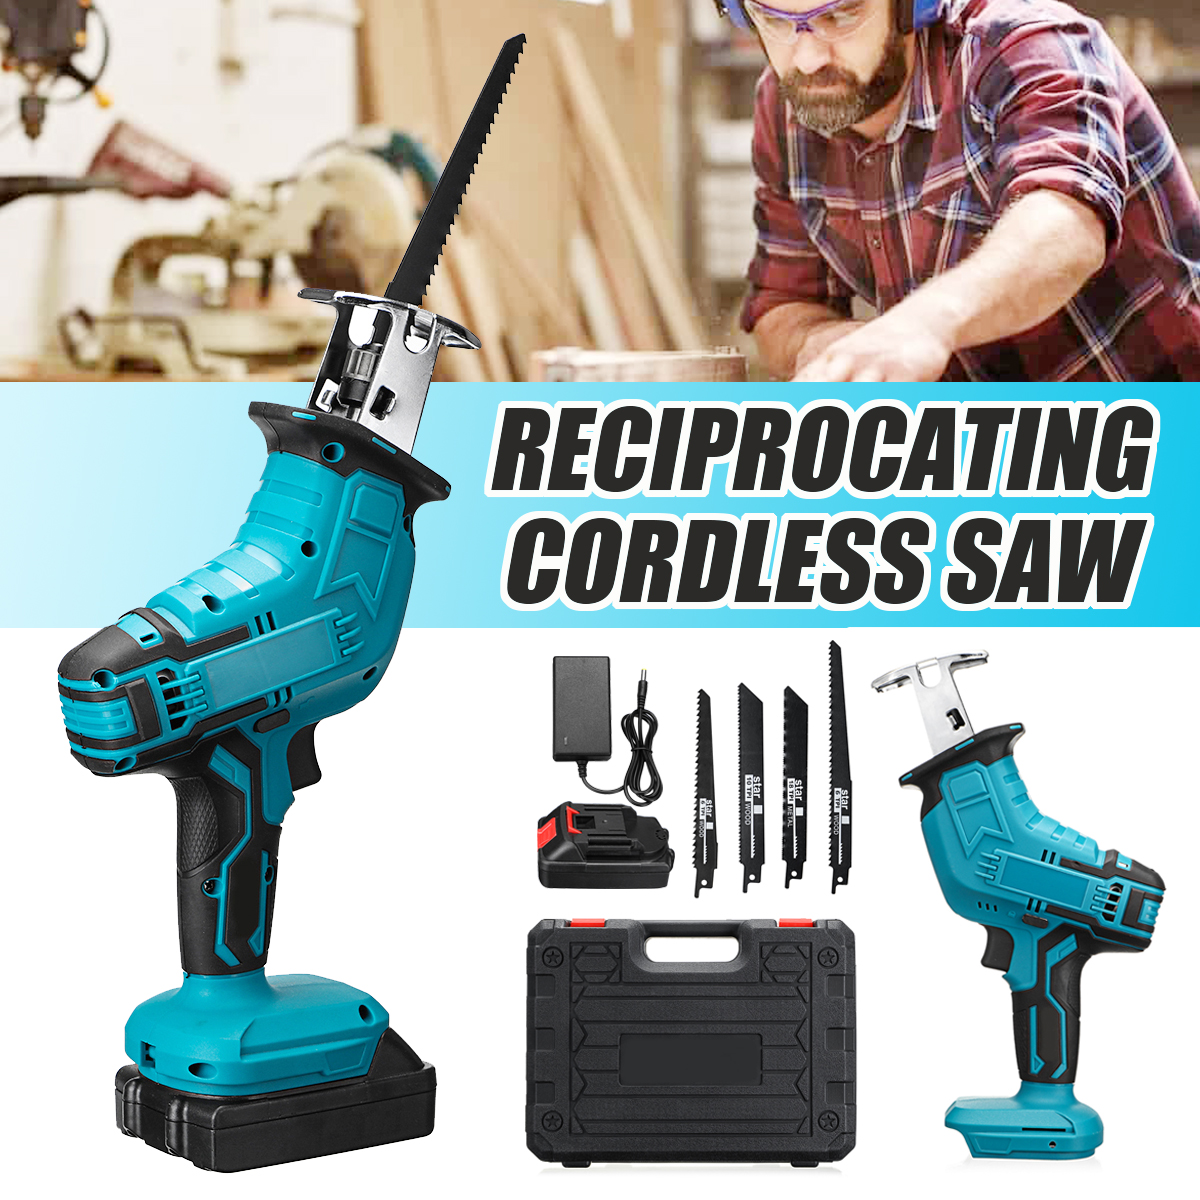 21V-Cordless-Reciprocating-Saw-Electric-Sabre-Saw-Woodworking-Wood-Metal-Cutting-Tool-1762480-2